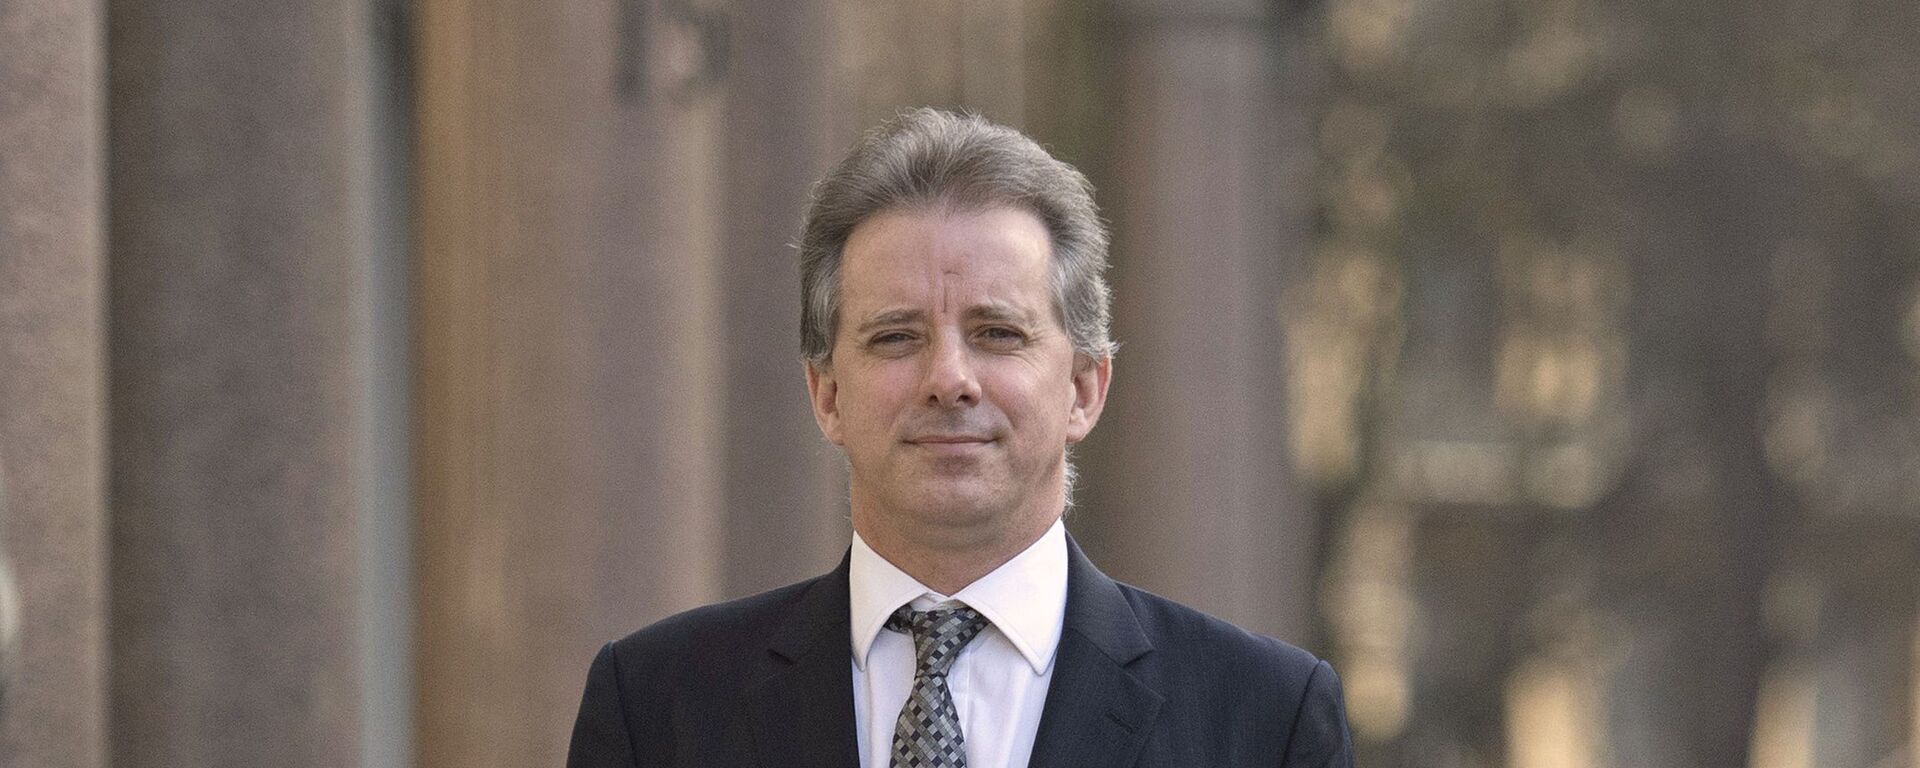 FILE - This Tuesday, March 7, 2017 file photo shows Christopher Steele, the former MI6 agent who set up Orbis Business Intelligence and compiled a dossier on Donald Trump, in London - Sputnik International, 1920, 05.04.2022